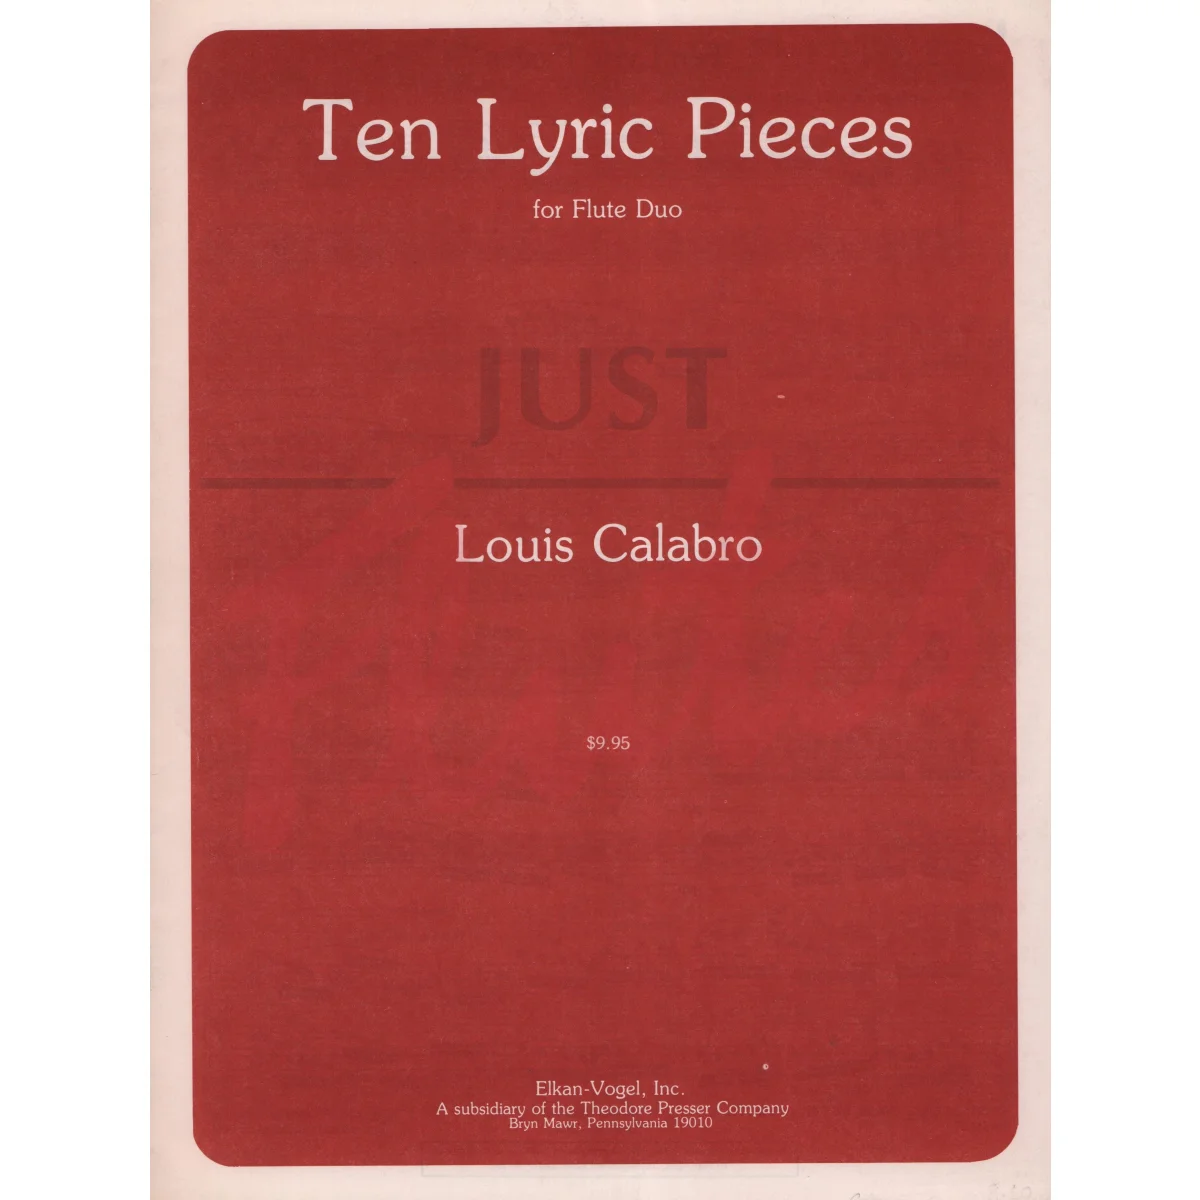 10 Lyric Pieces for Flute Duo